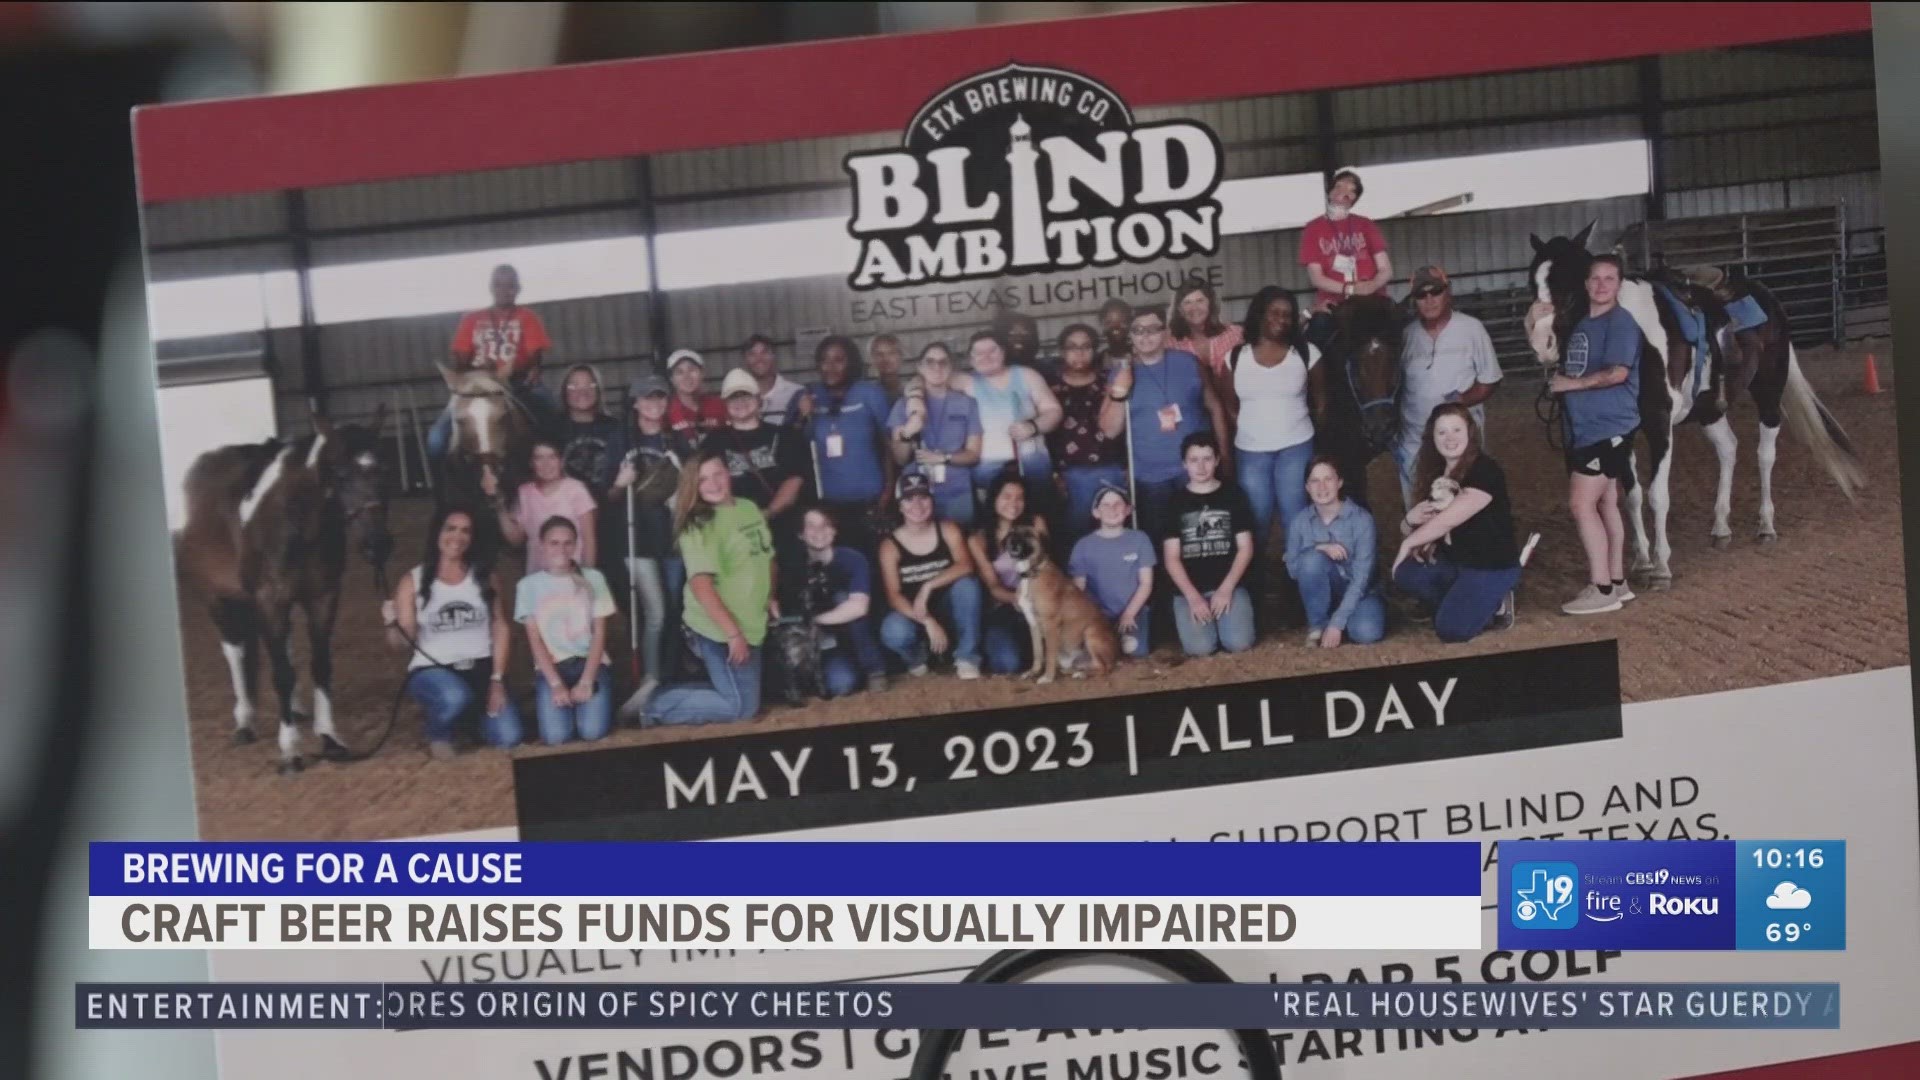 ETX Brewing Company is bringing back their brew "Blind Ambition" to help raise funds for East Texas Lighthouse for the Blind's second annual summer camp.